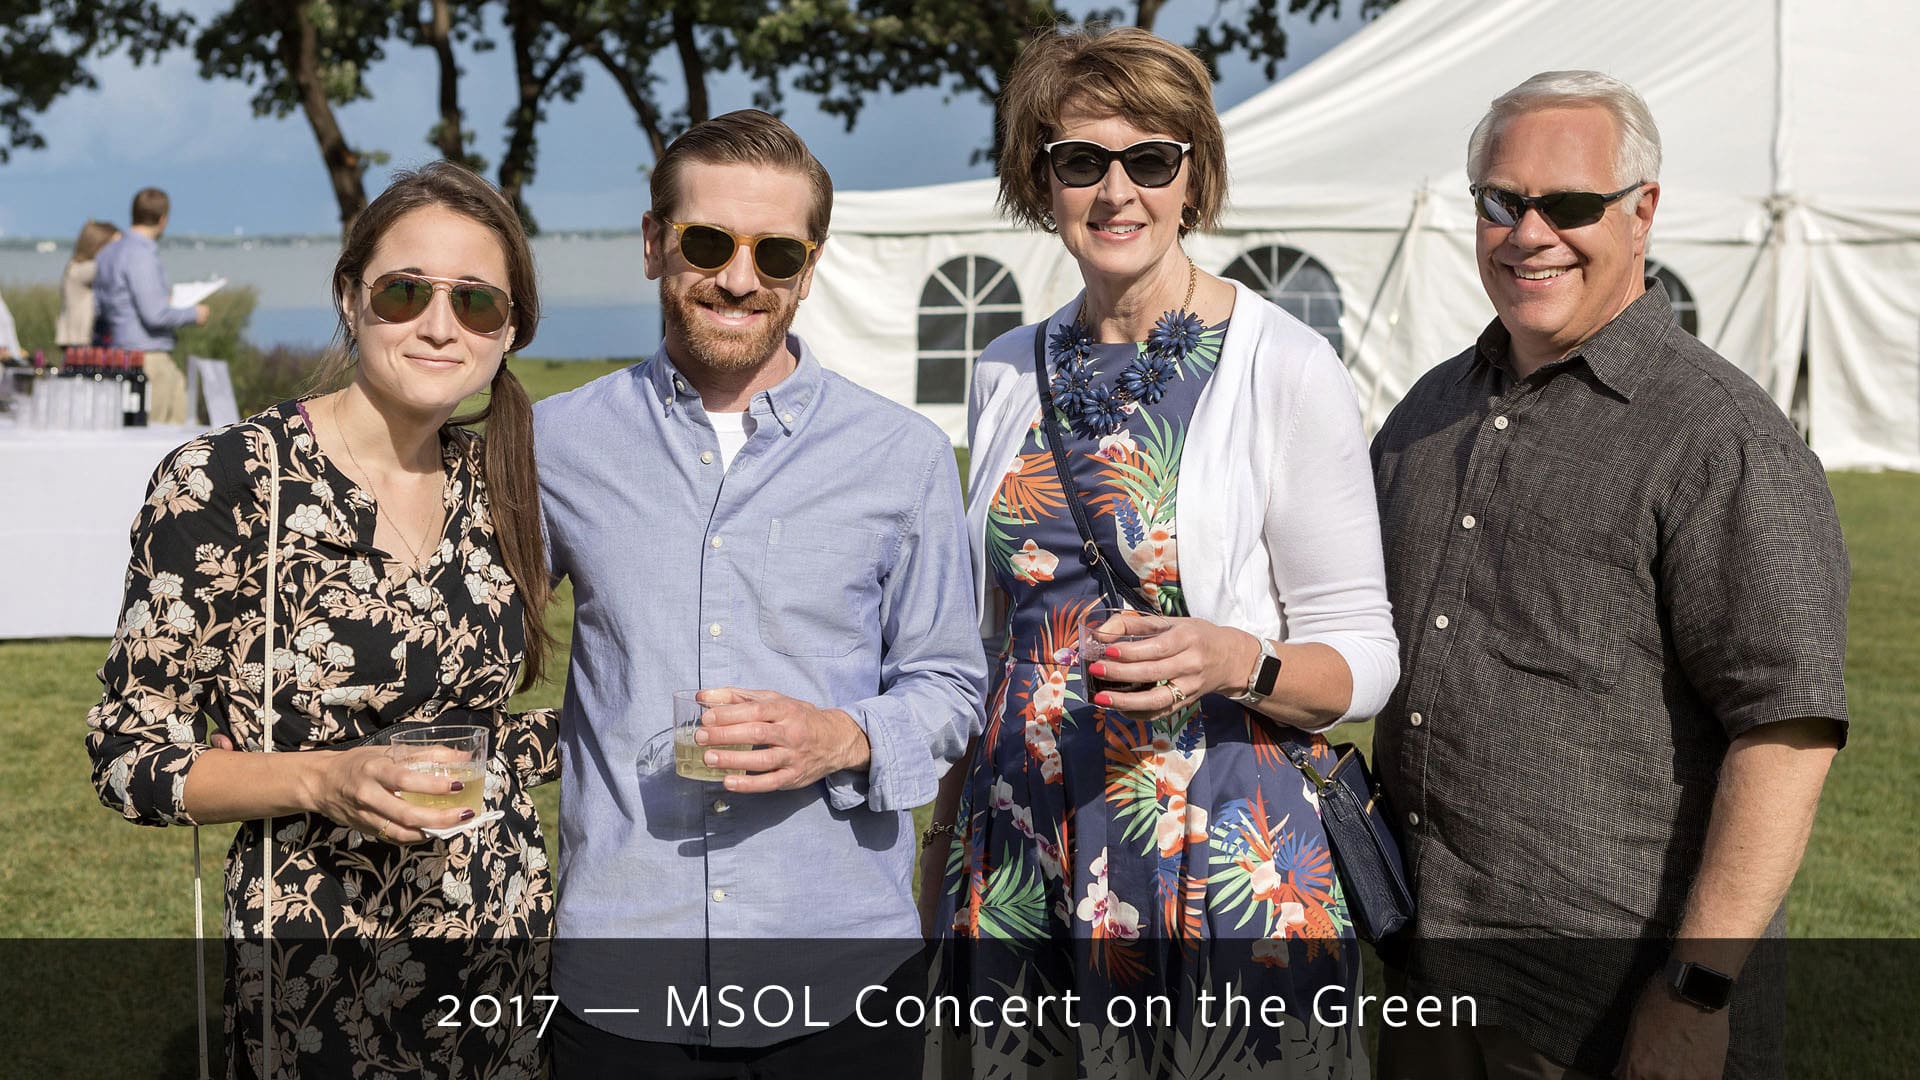 MSOL Concert on the Green